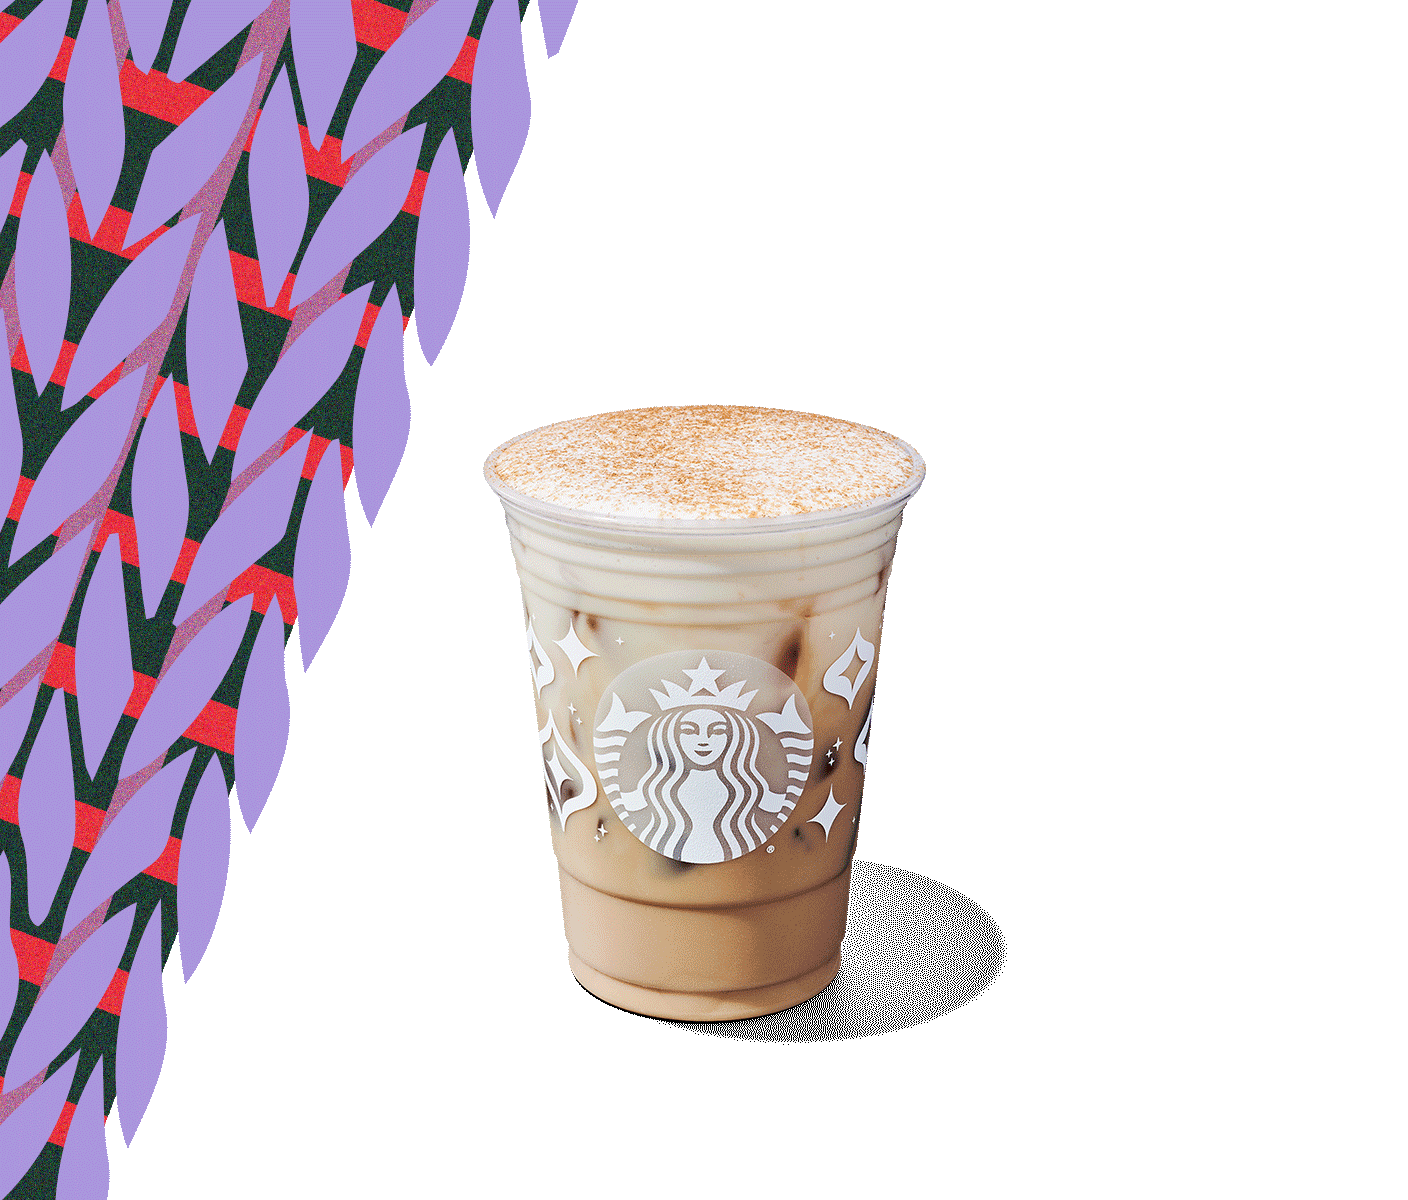 Creamy iced chai drink with a foamy topping in a clear to-go cup.